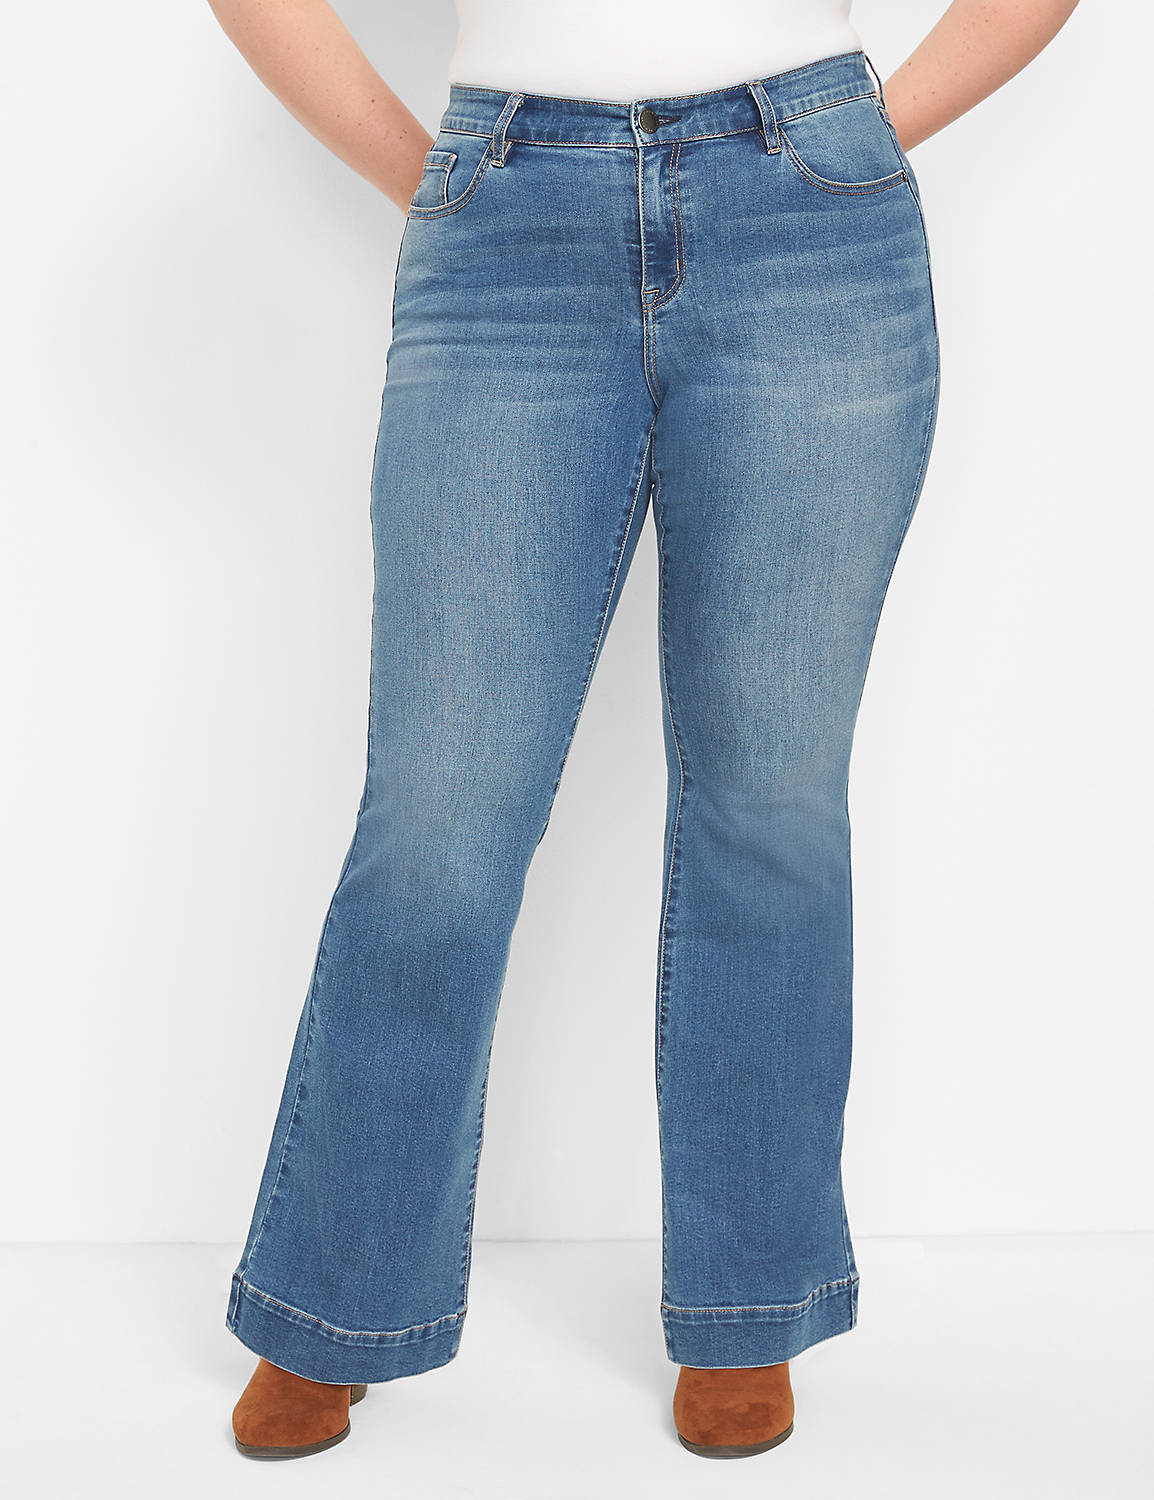 SIGNATURE FIT FLARE JEAN -AZUR WASH Product Image 4